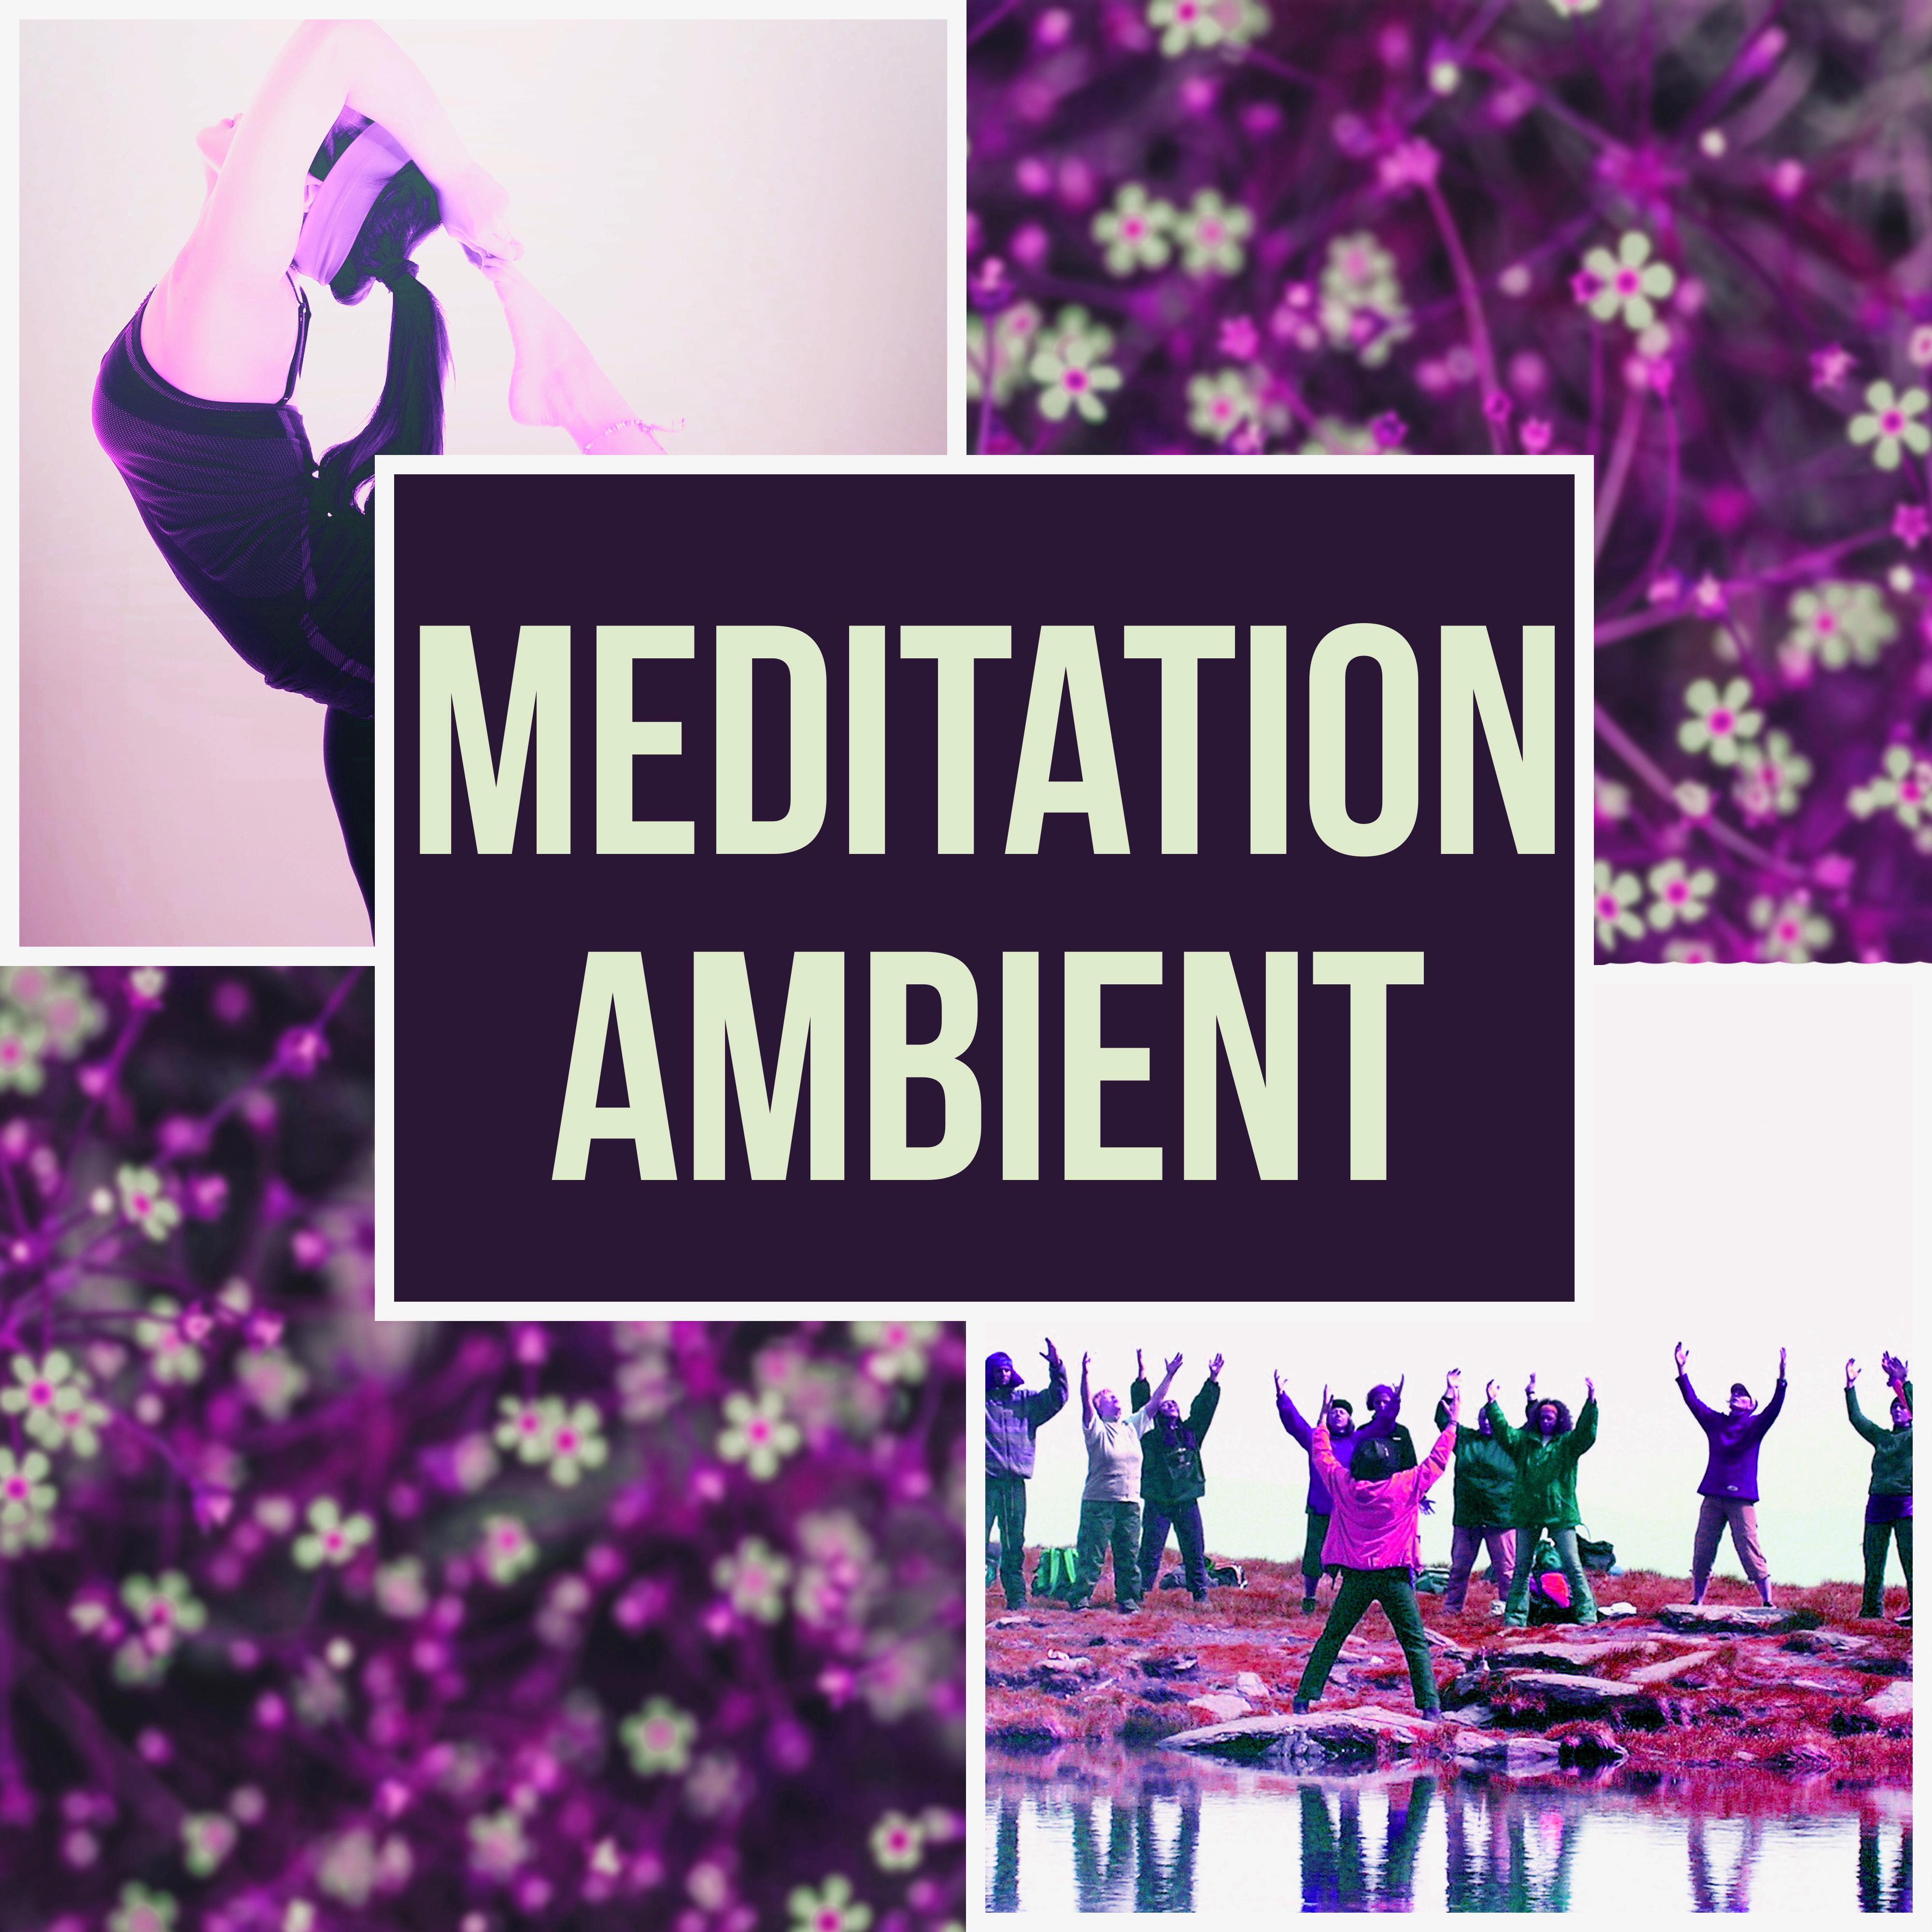 Meditation Ambient – Calm Music, Nature Sounds, Yoga, Background Music, Easy Listening, Mindfulness